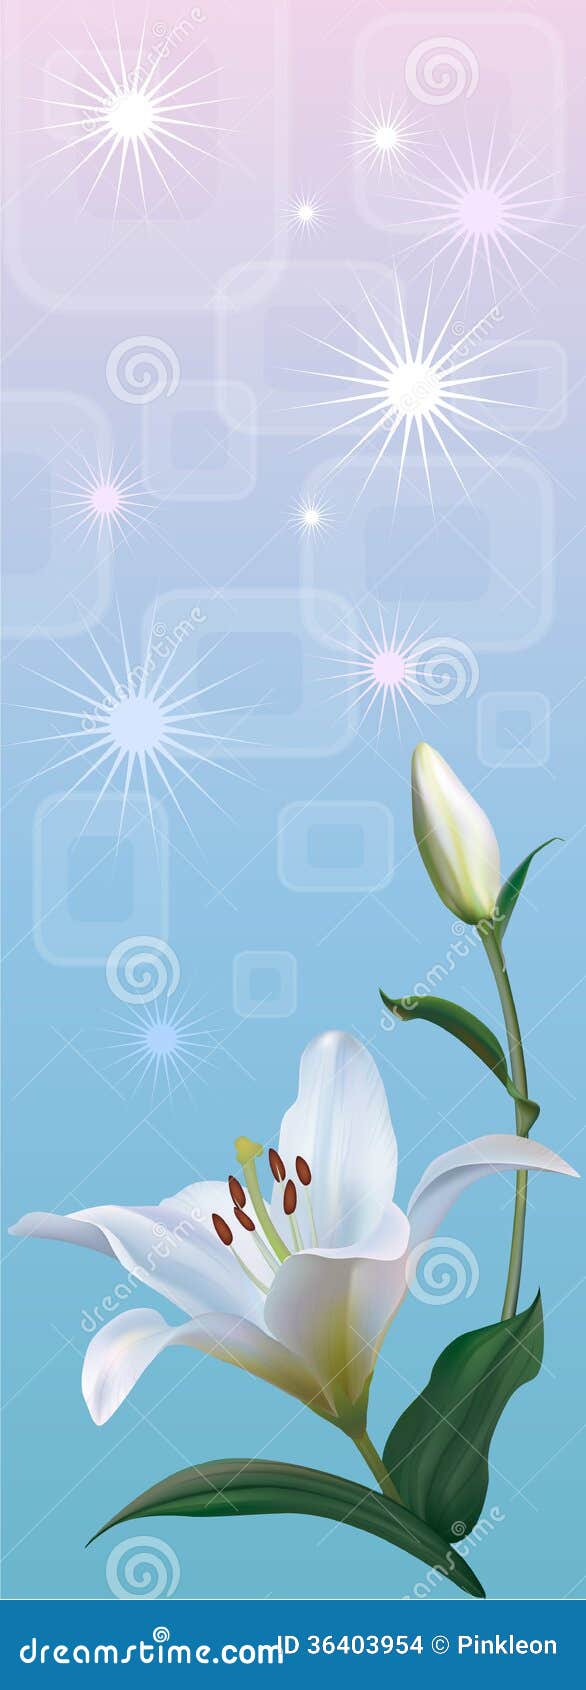 Flower White Lily on a Blue Stock Vector - Illustration of shiny ...